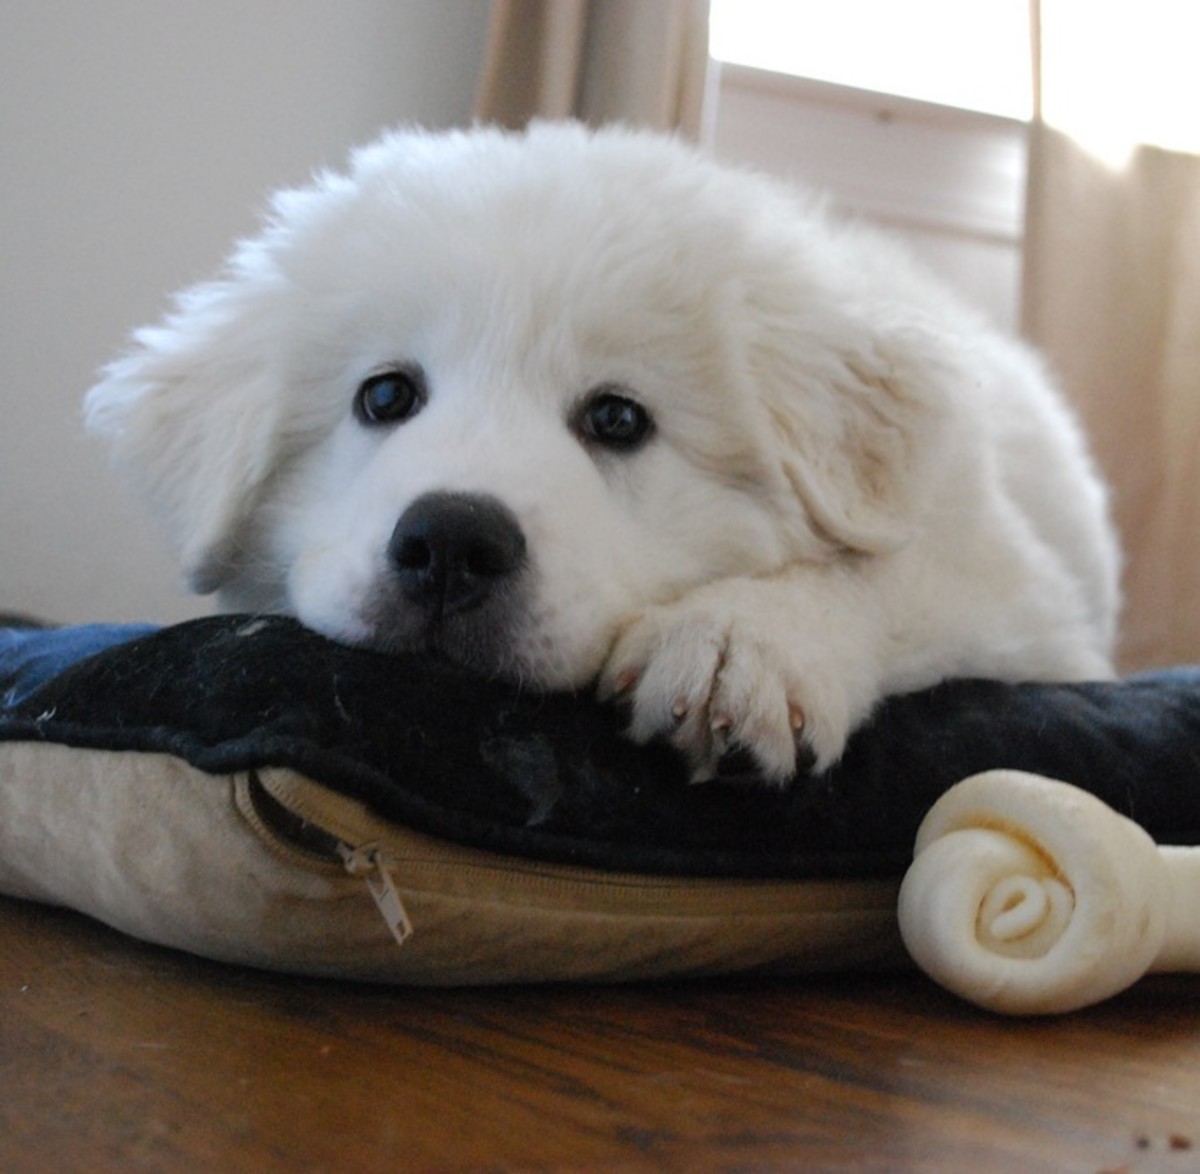 A Great Pyrenees puppy.